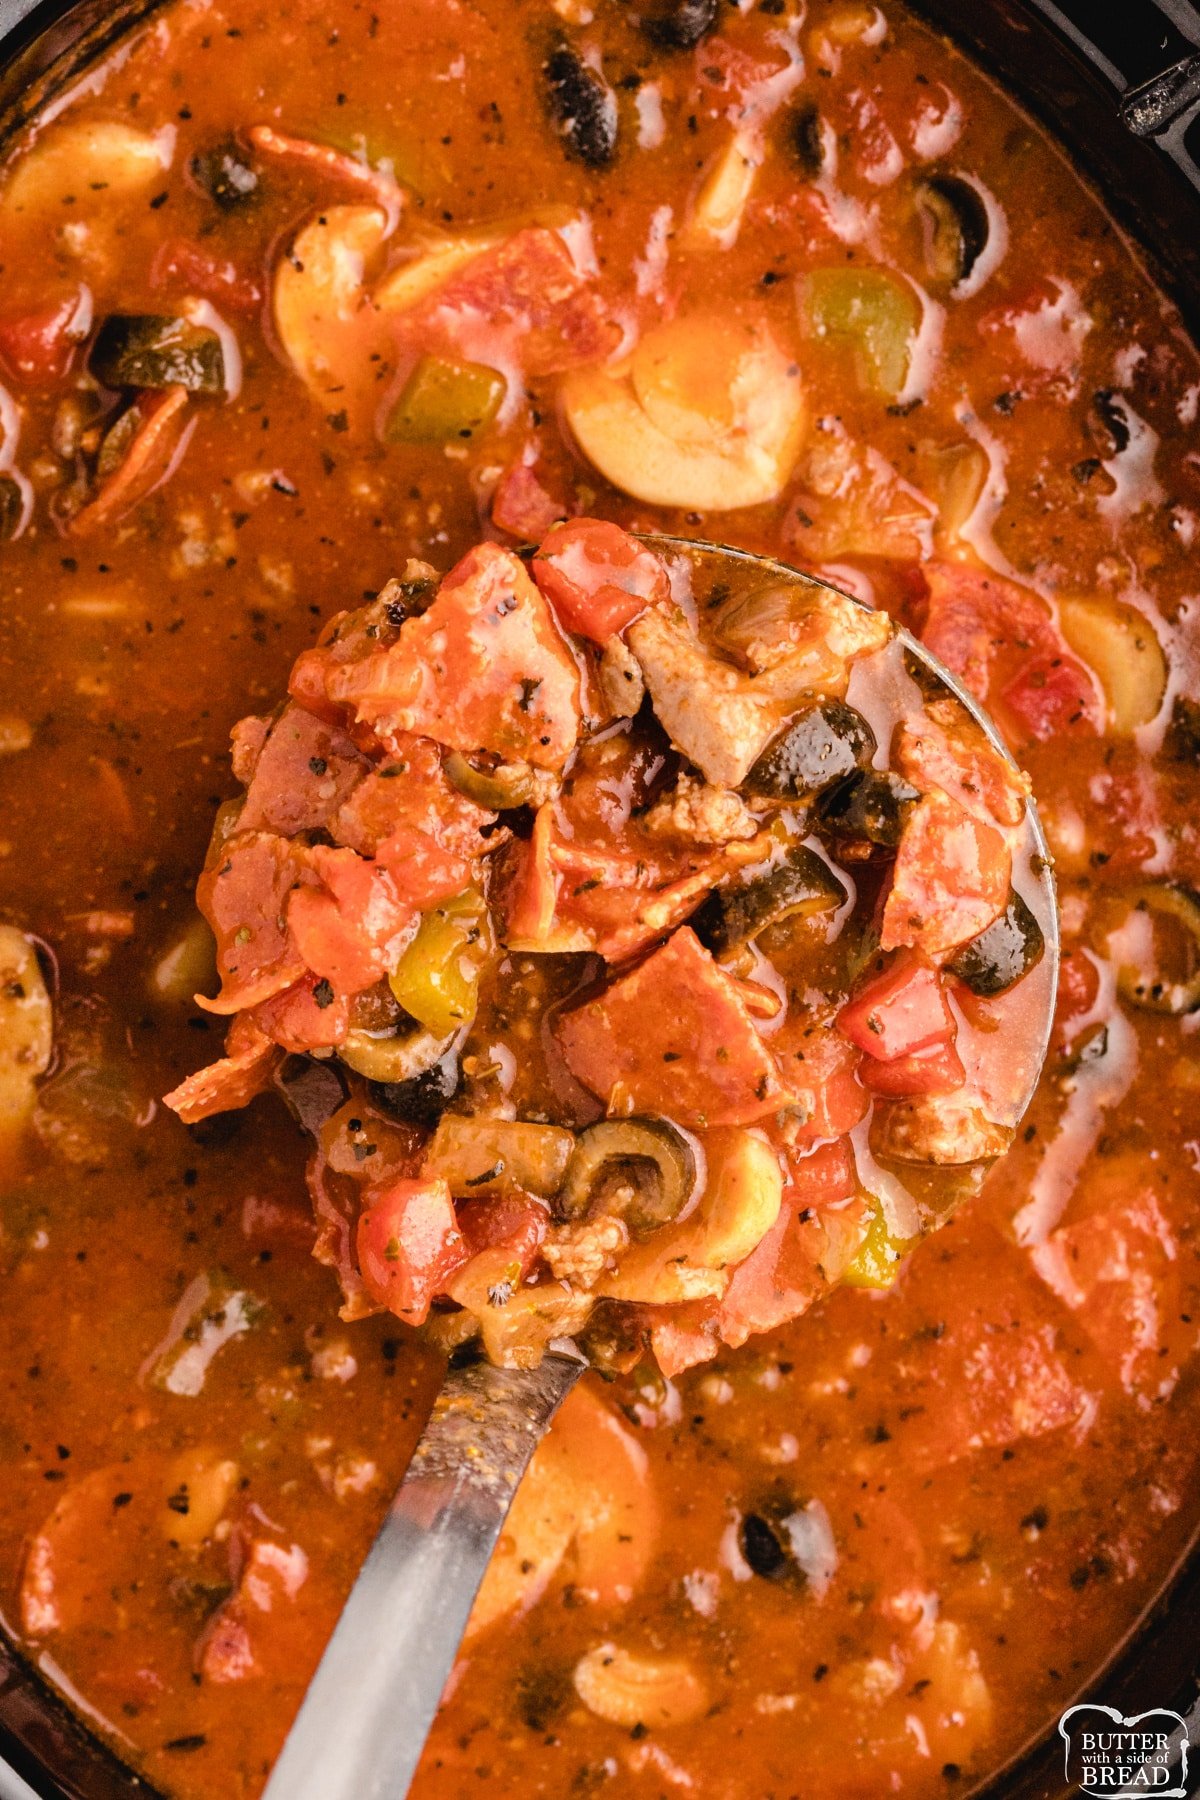 Crockpot soup recipe made with tomato soup, olives, peppers, sausage and pepperoni